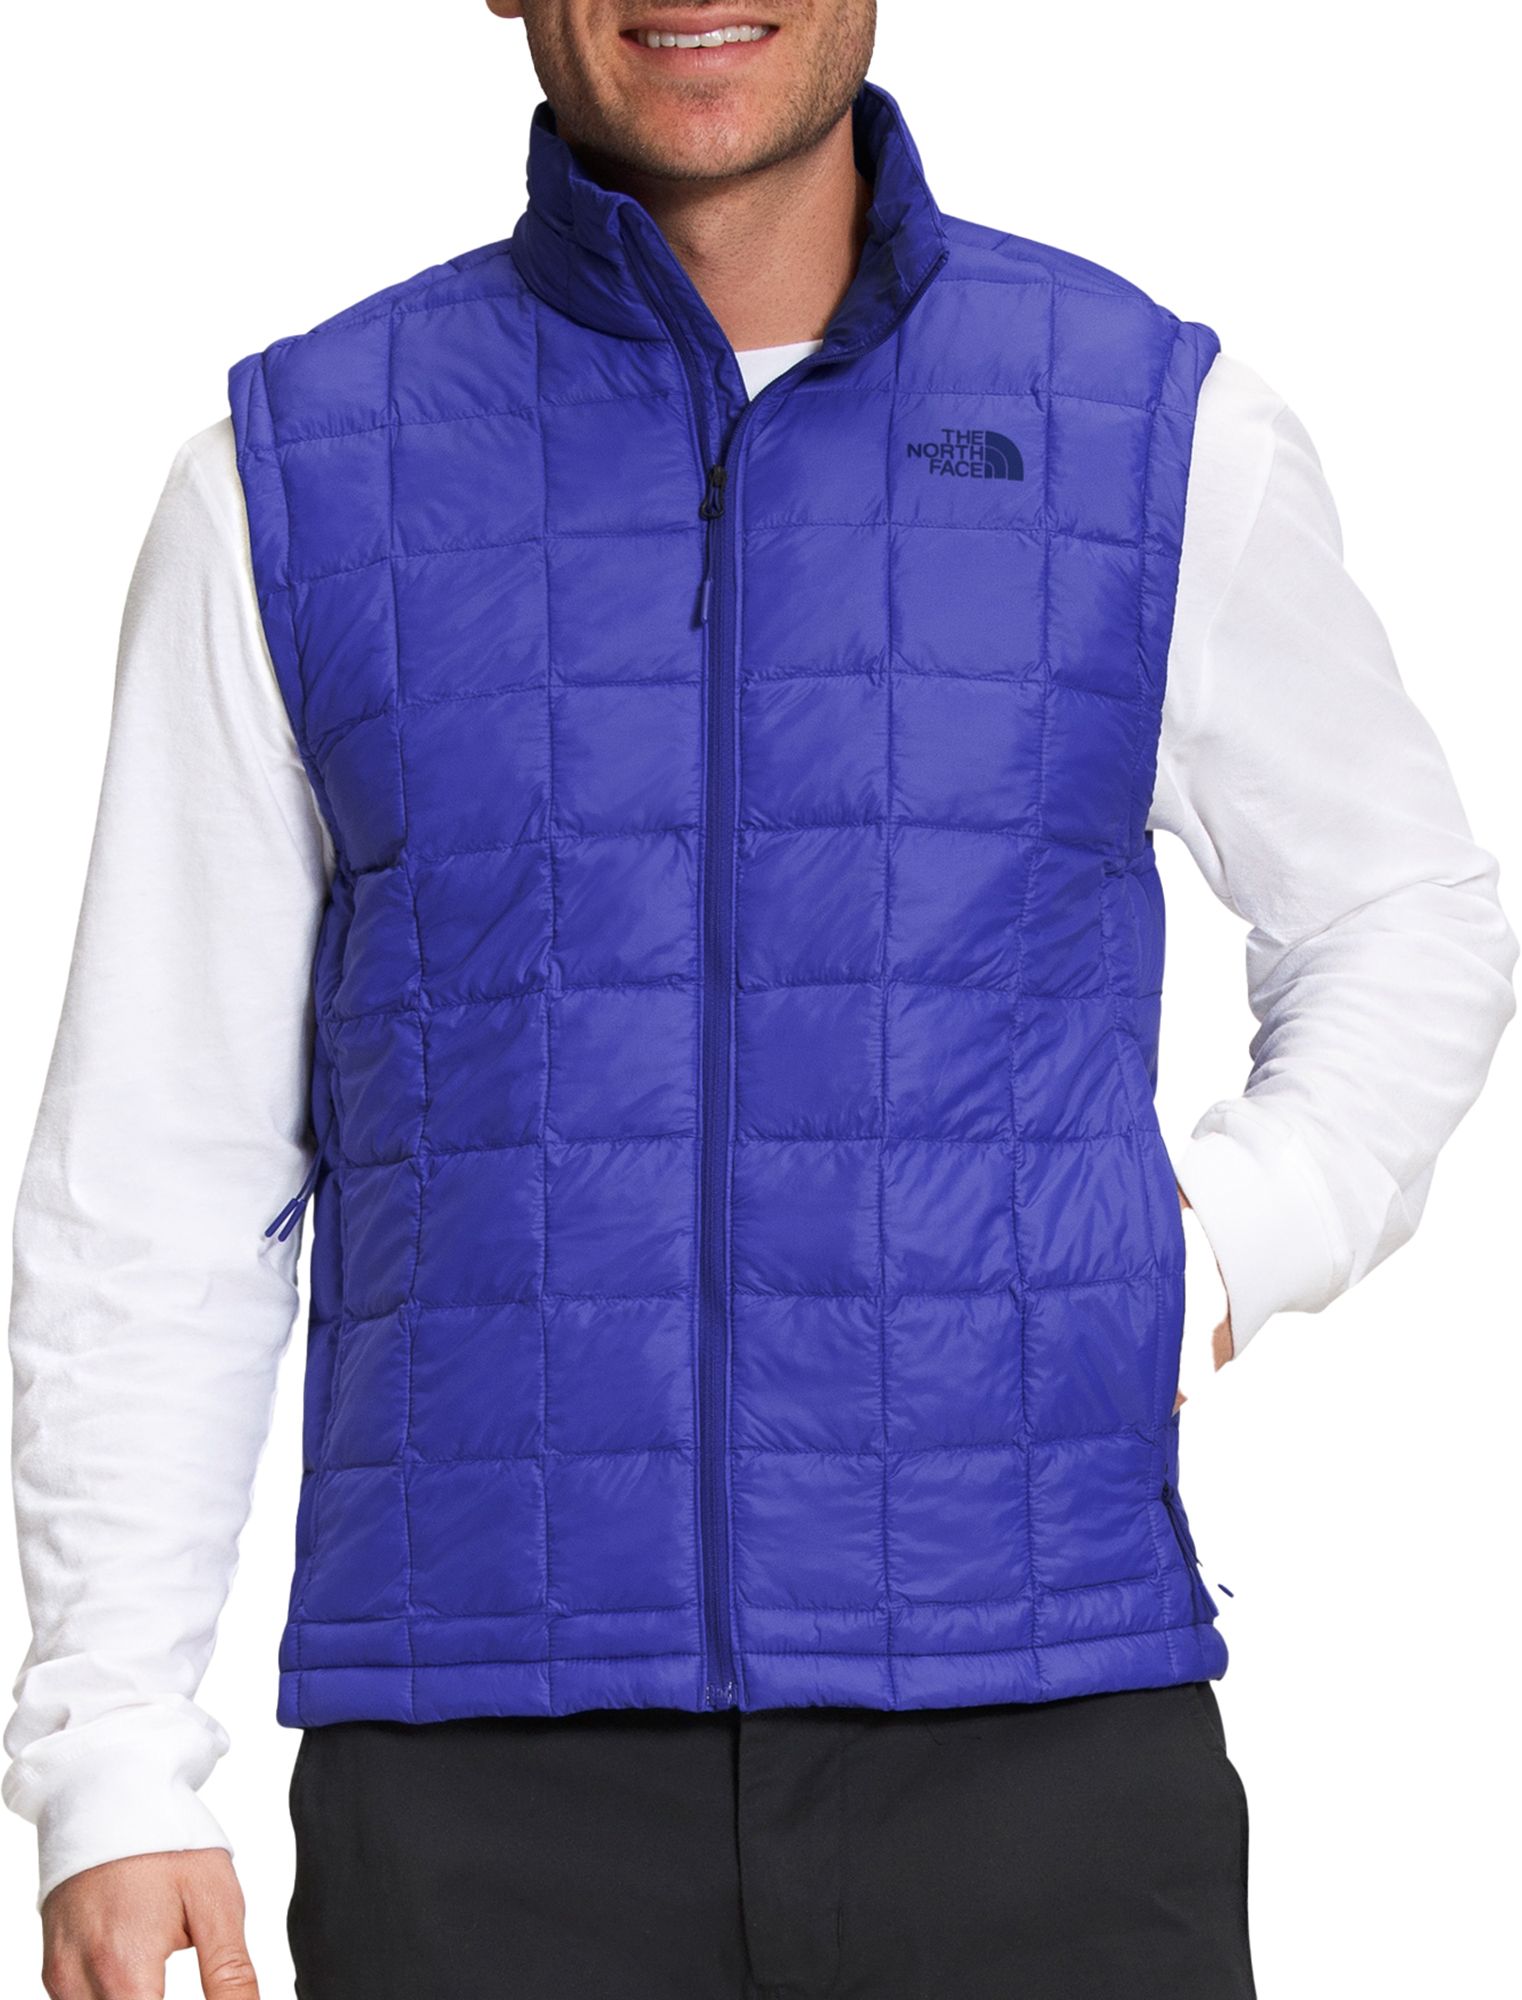 THE NORTH FACE THERMOBALL VERSA 日本未入荷 公式クリアランス ...